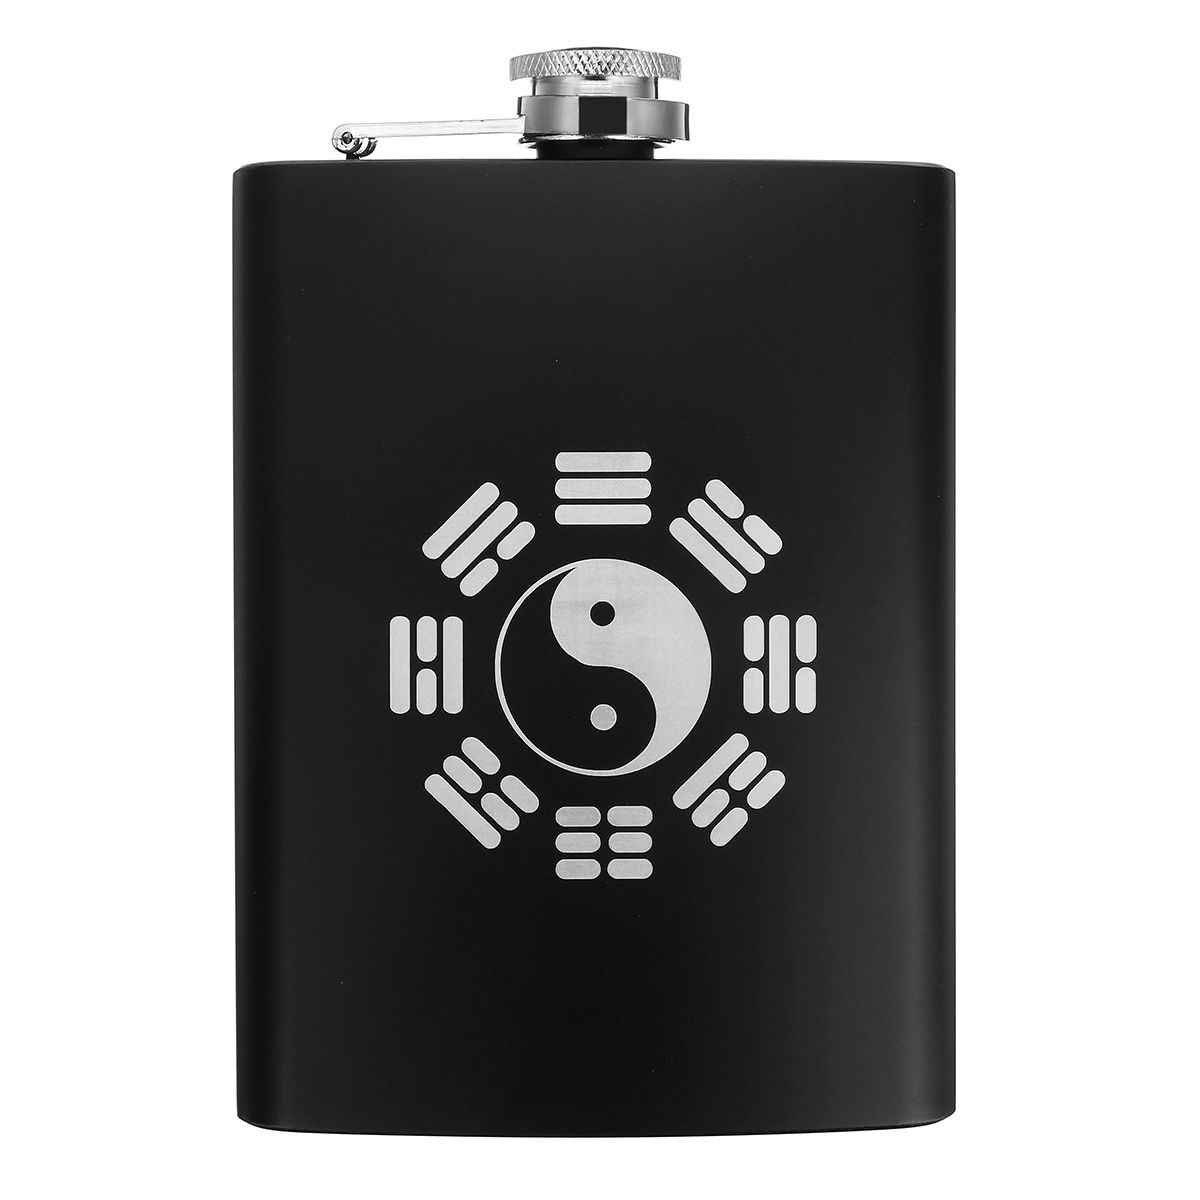 8oz-Stainless-Steel-Pocket-Liquor-Hip-Flask-Drink-Flagon-with-Funnel-1582092